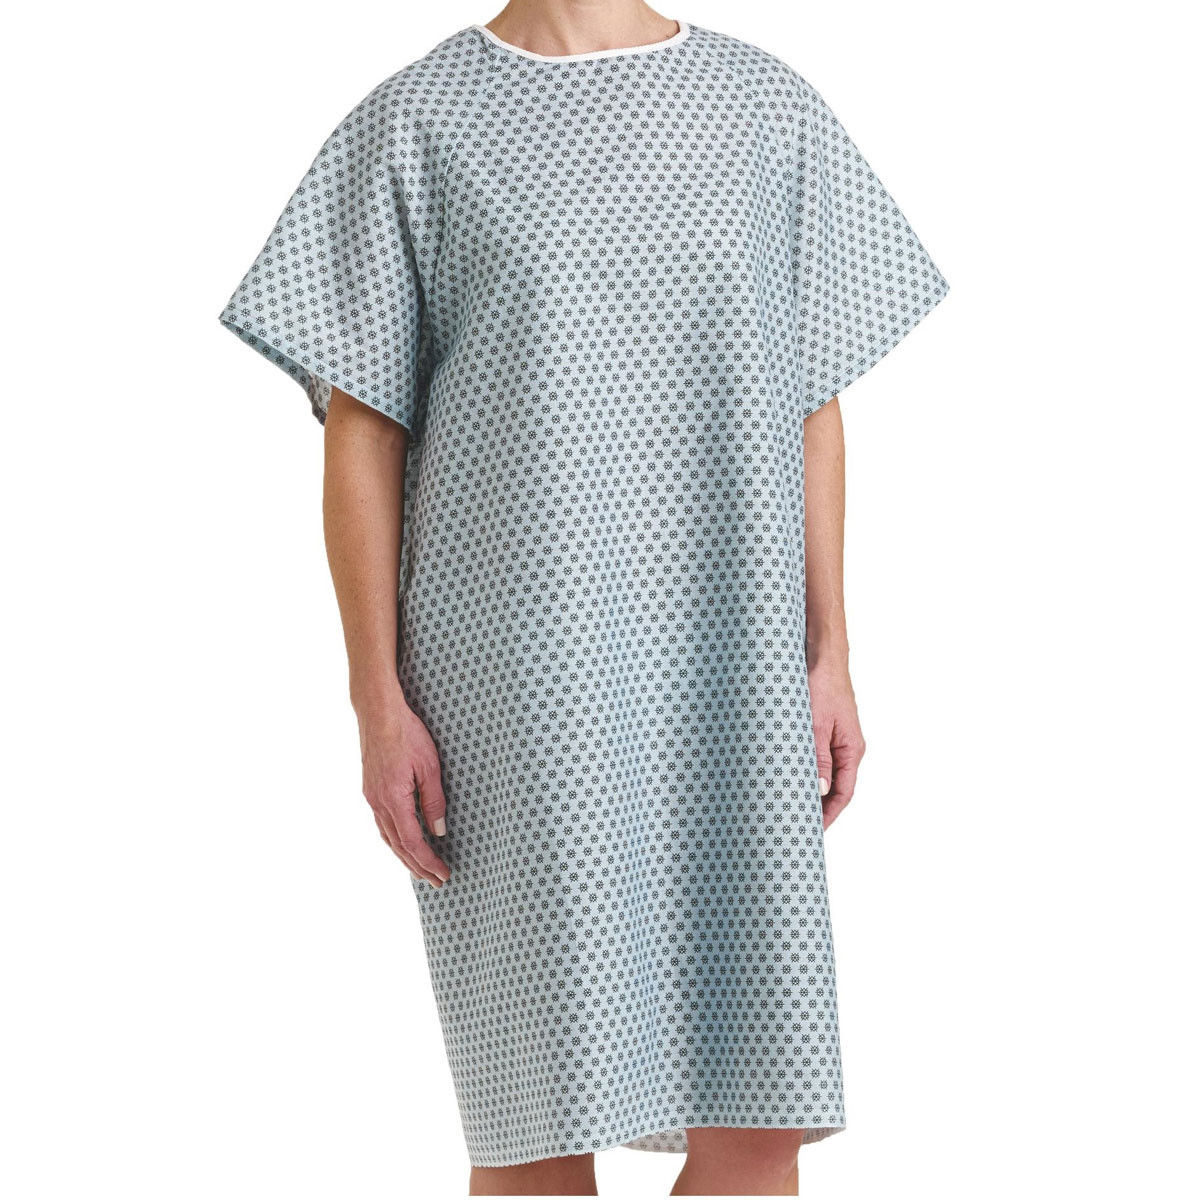 What is the design of this traditional hospital gown?